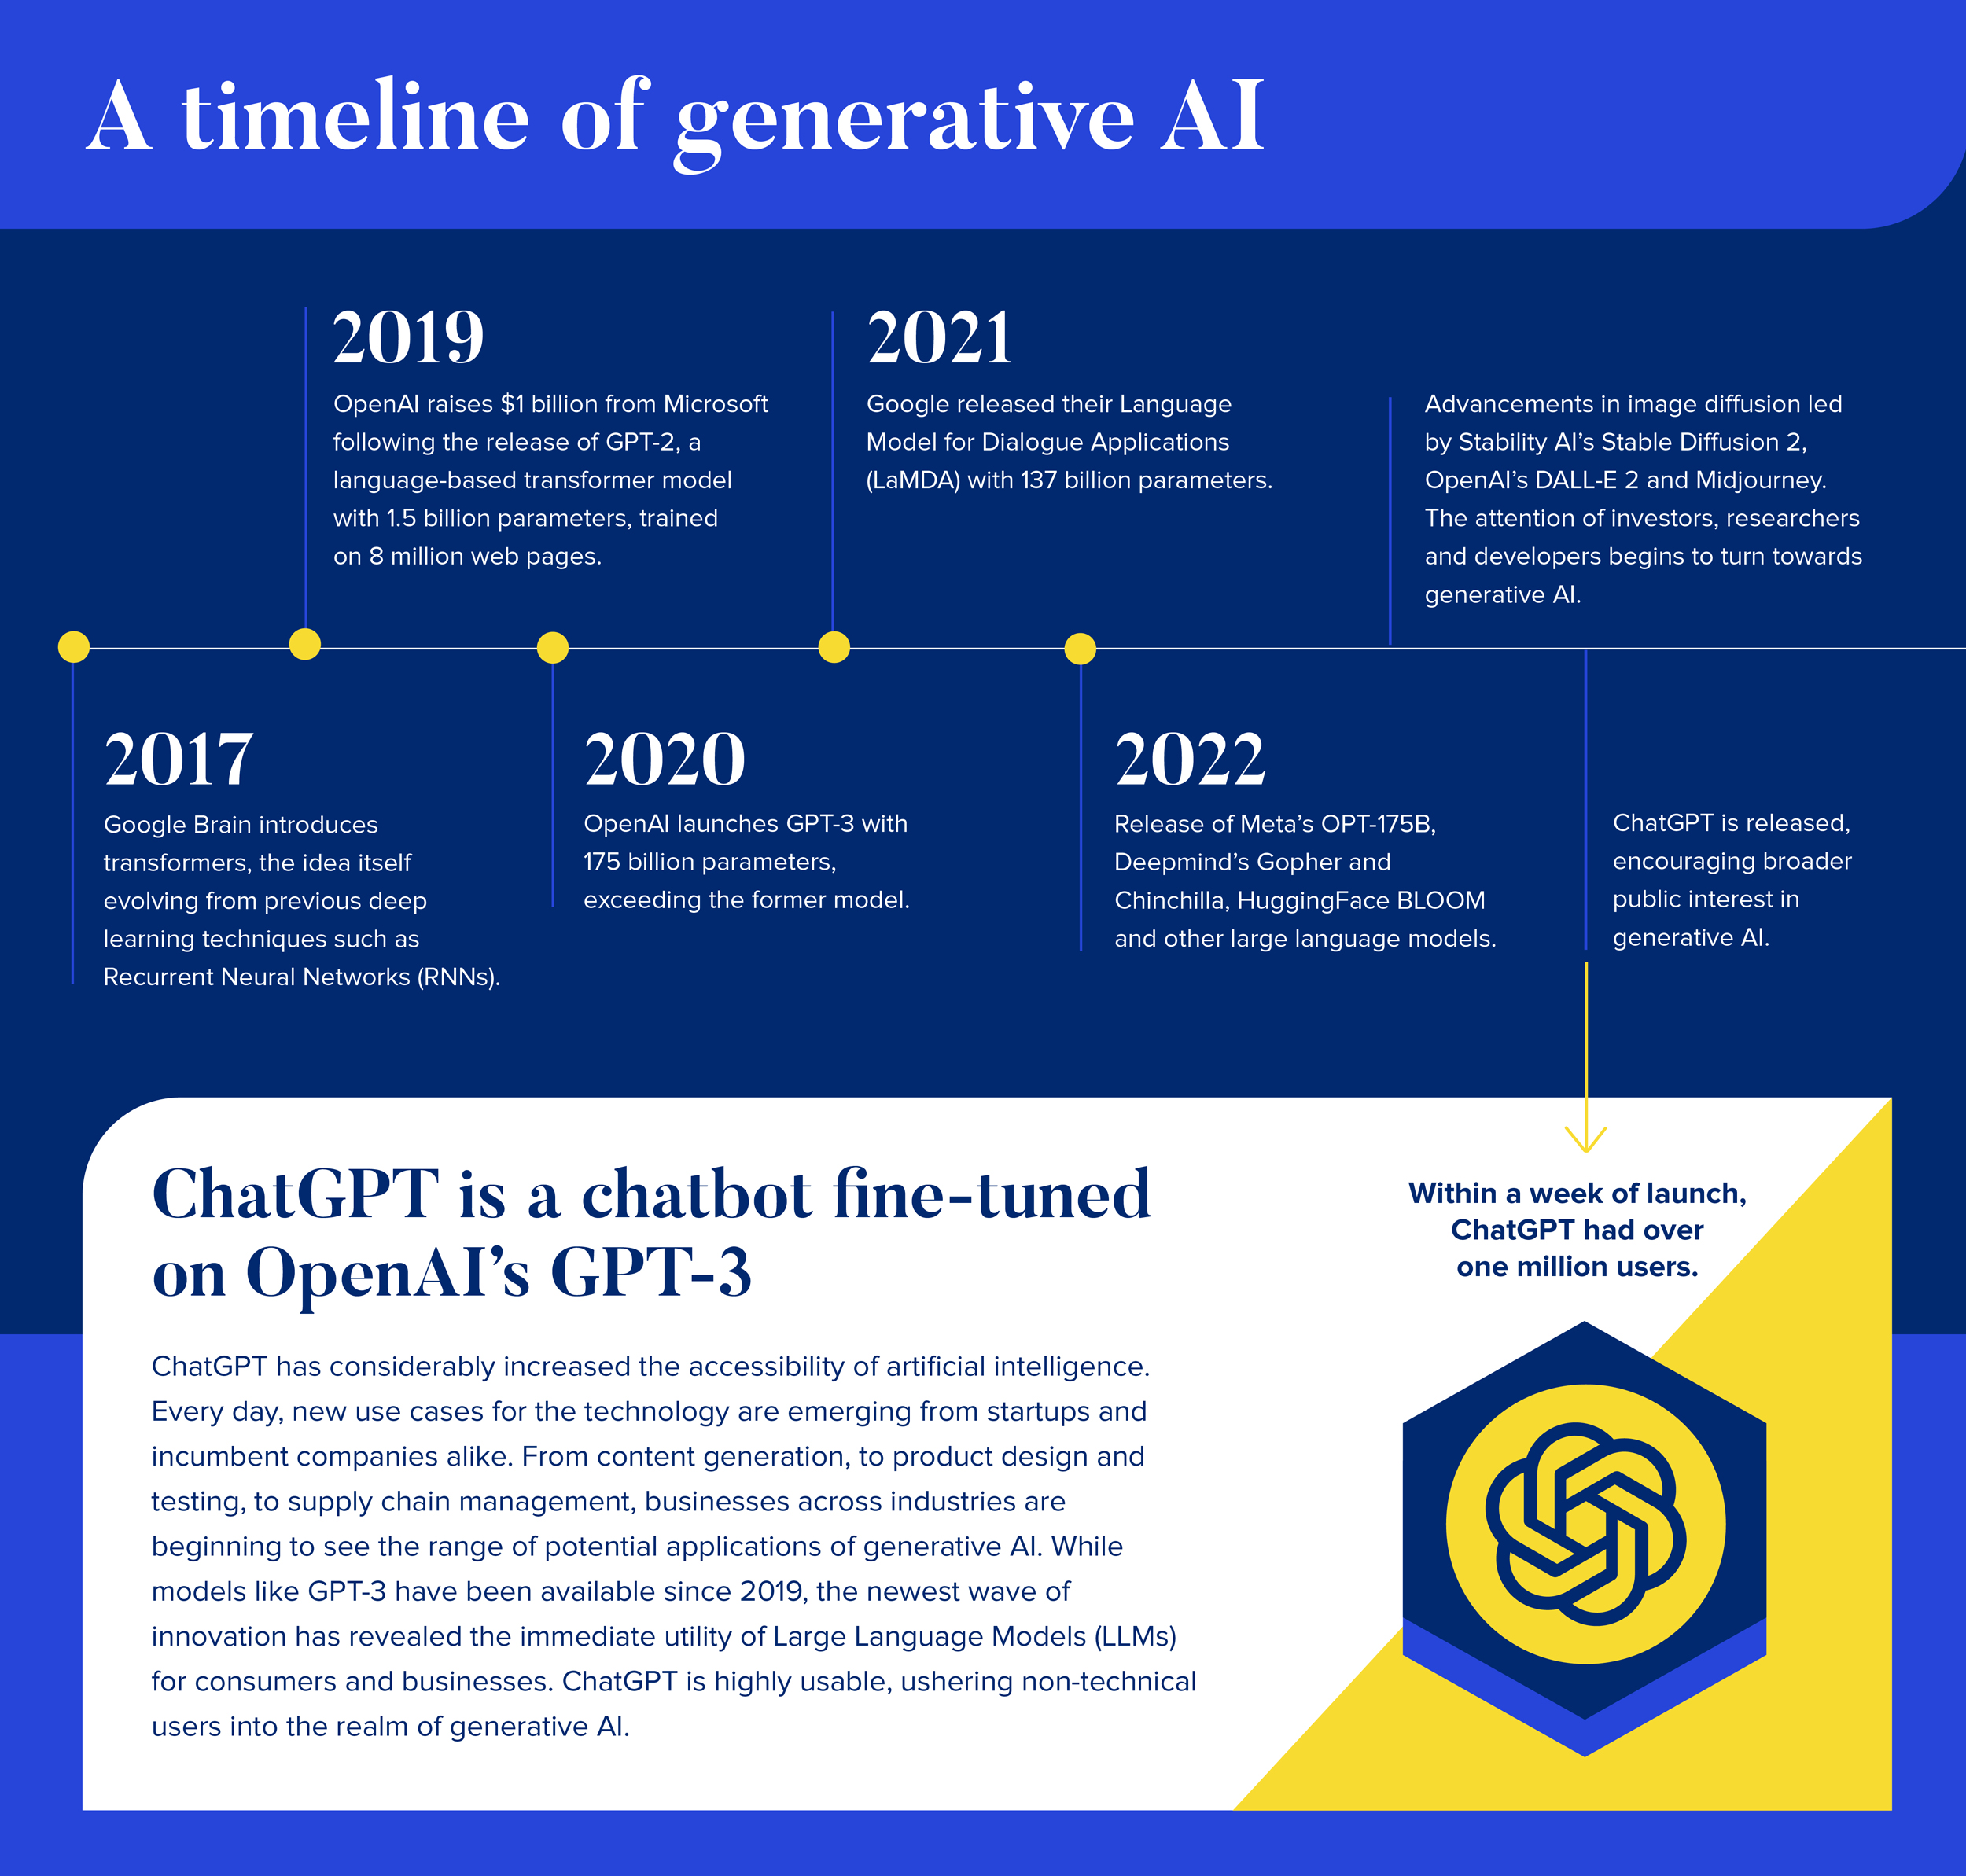 A timeline of recent Generative AI advances, starting in 2017. 